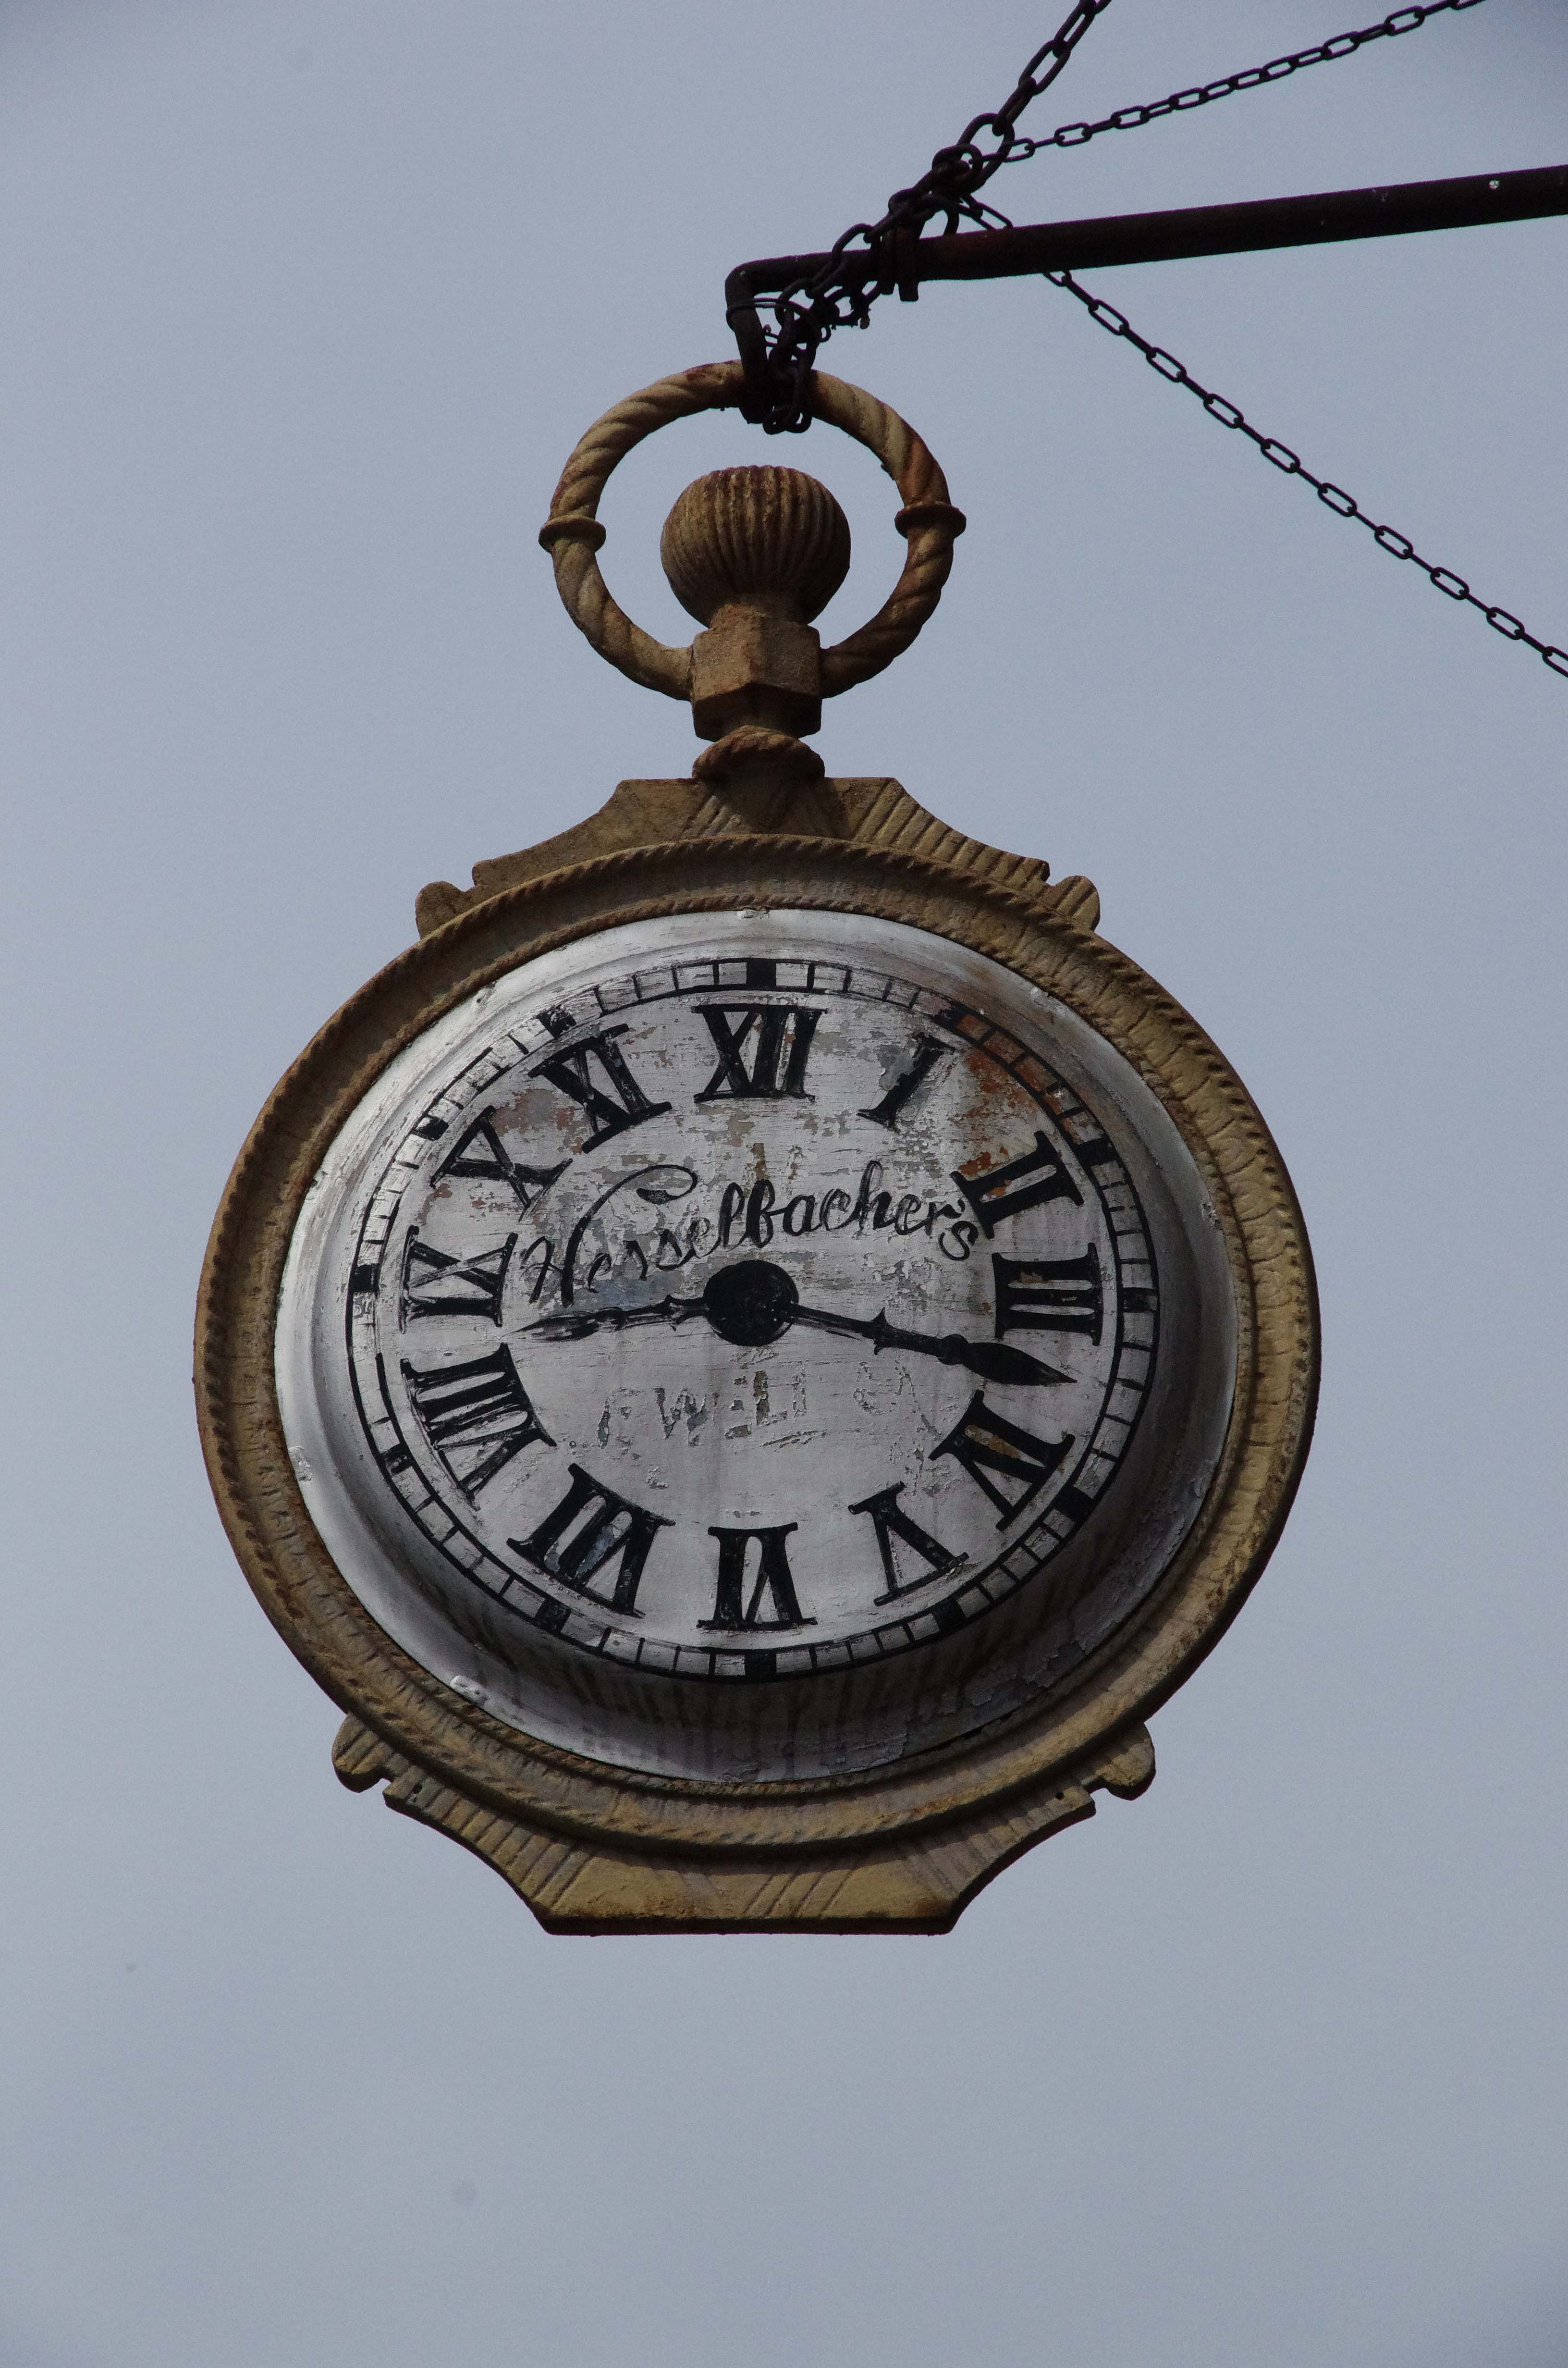 old clock downtown Galena, IL - Pentax User Photo Gallery